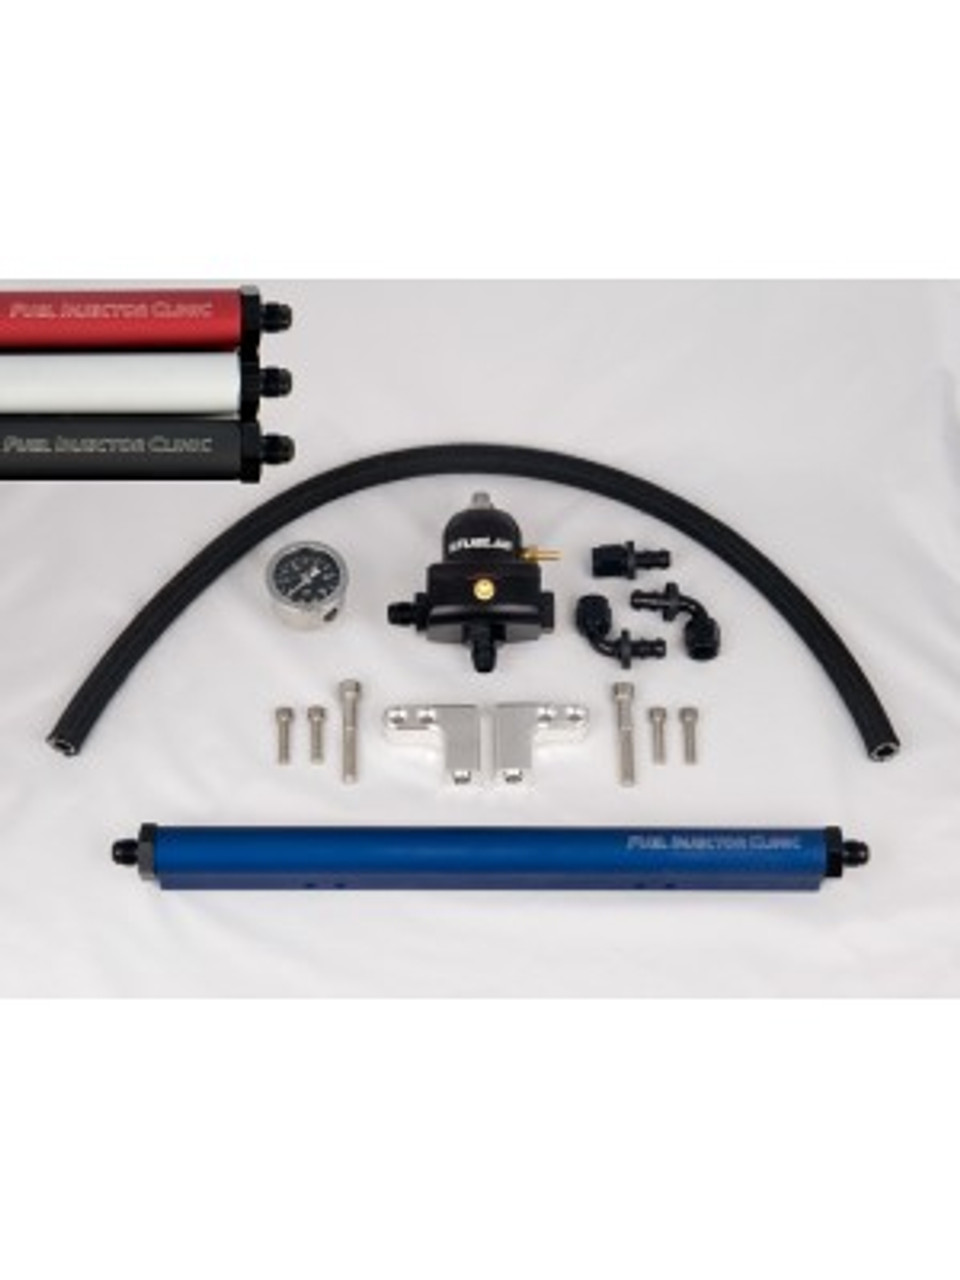 COMPLETE DSM FUEL RAIL KIT WITH -8 AN INLET & -6 AN RETURN FITTINGS